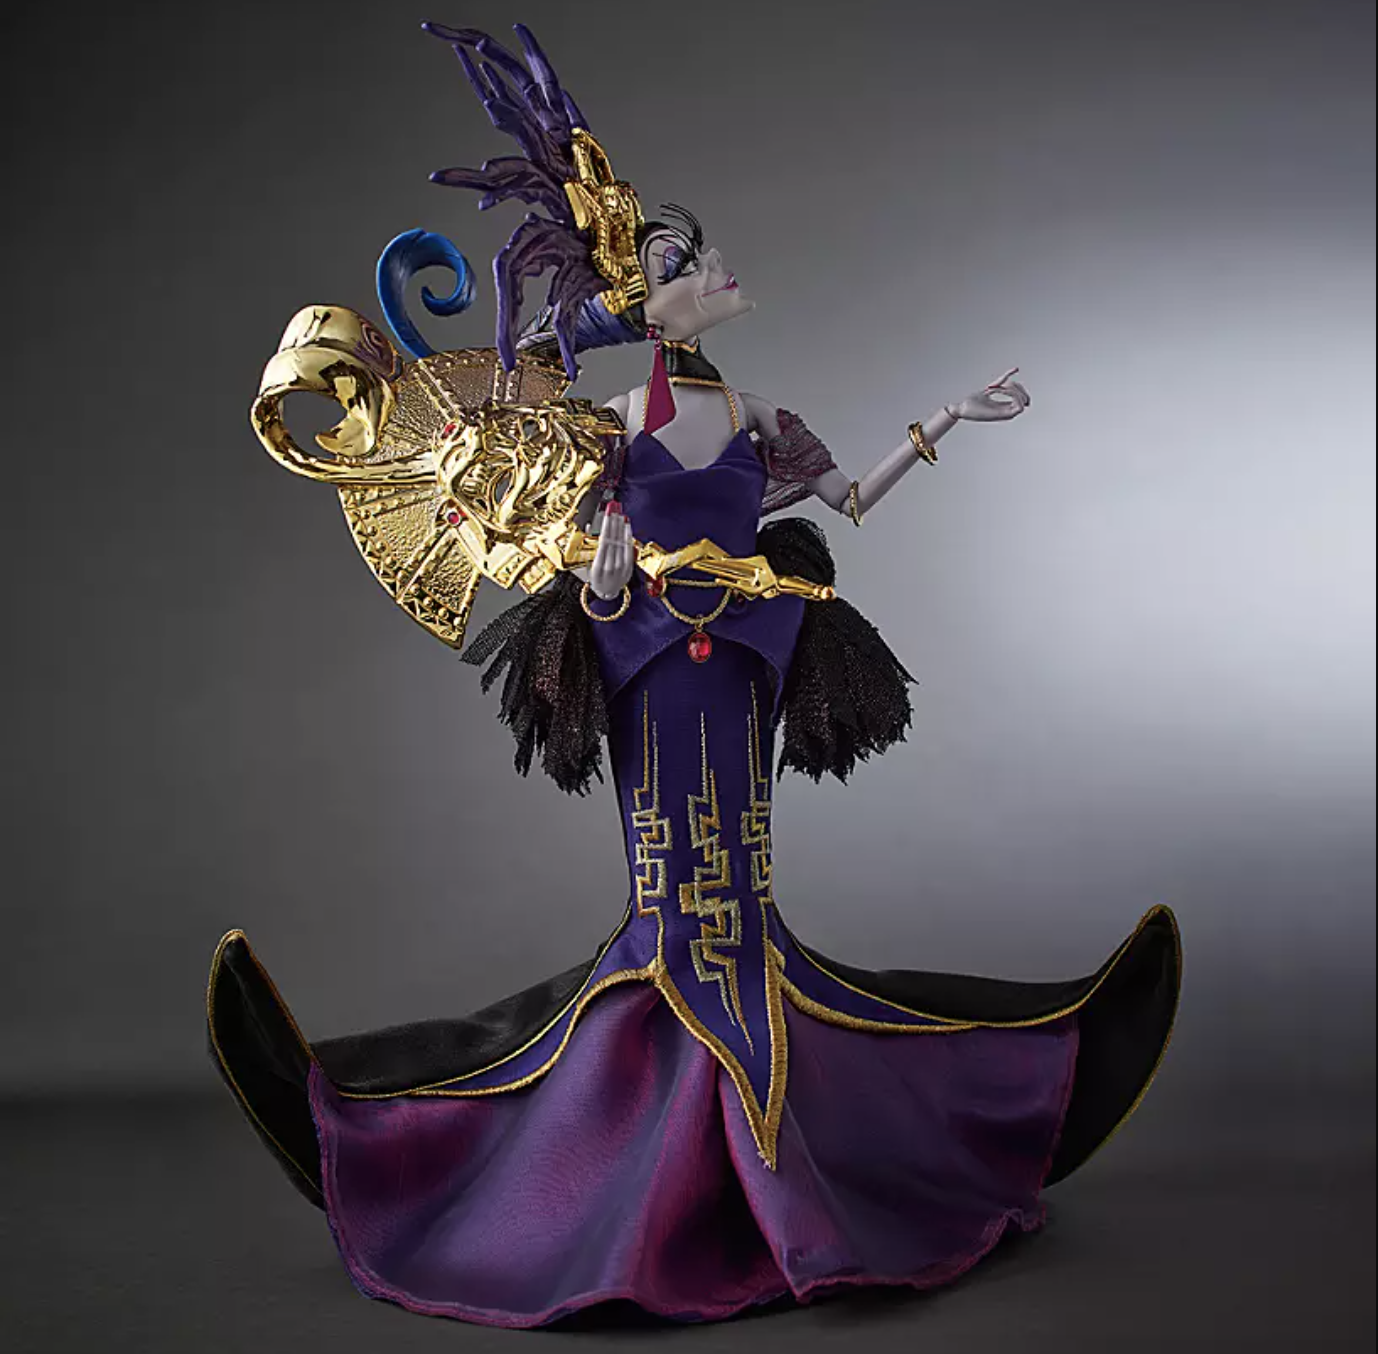 Already Disney S Villains Midnight Masquerade Yzma Doll Is Sold Out The Disney Food Blog